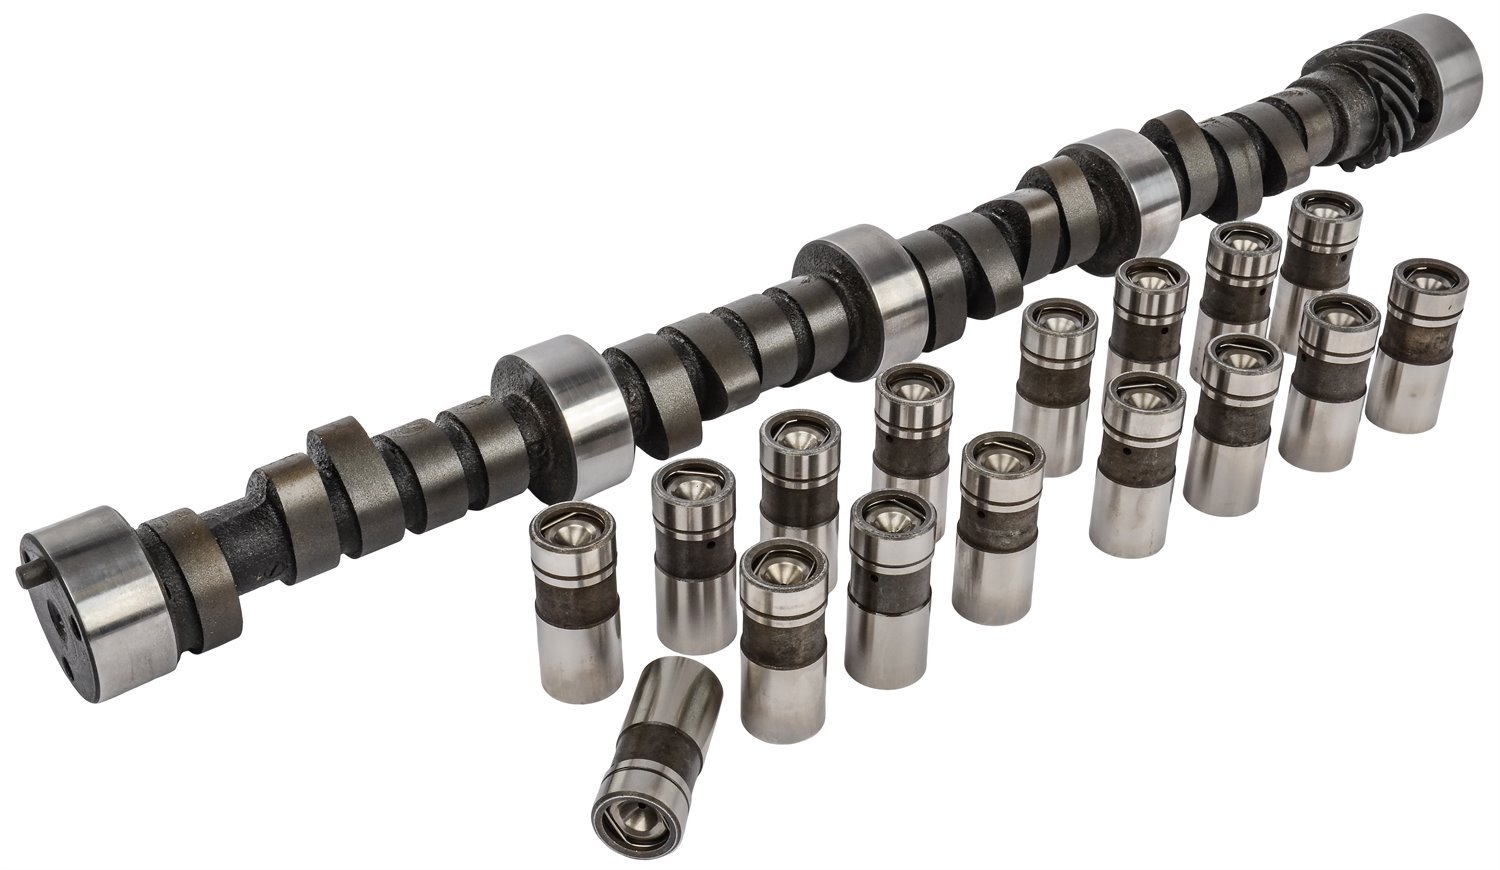 Hydraulic Flat Tappet Camshaft and Lifters for 1957-1985 Small Block Chevy 262-400 ci [2200-5700 RPM Range]